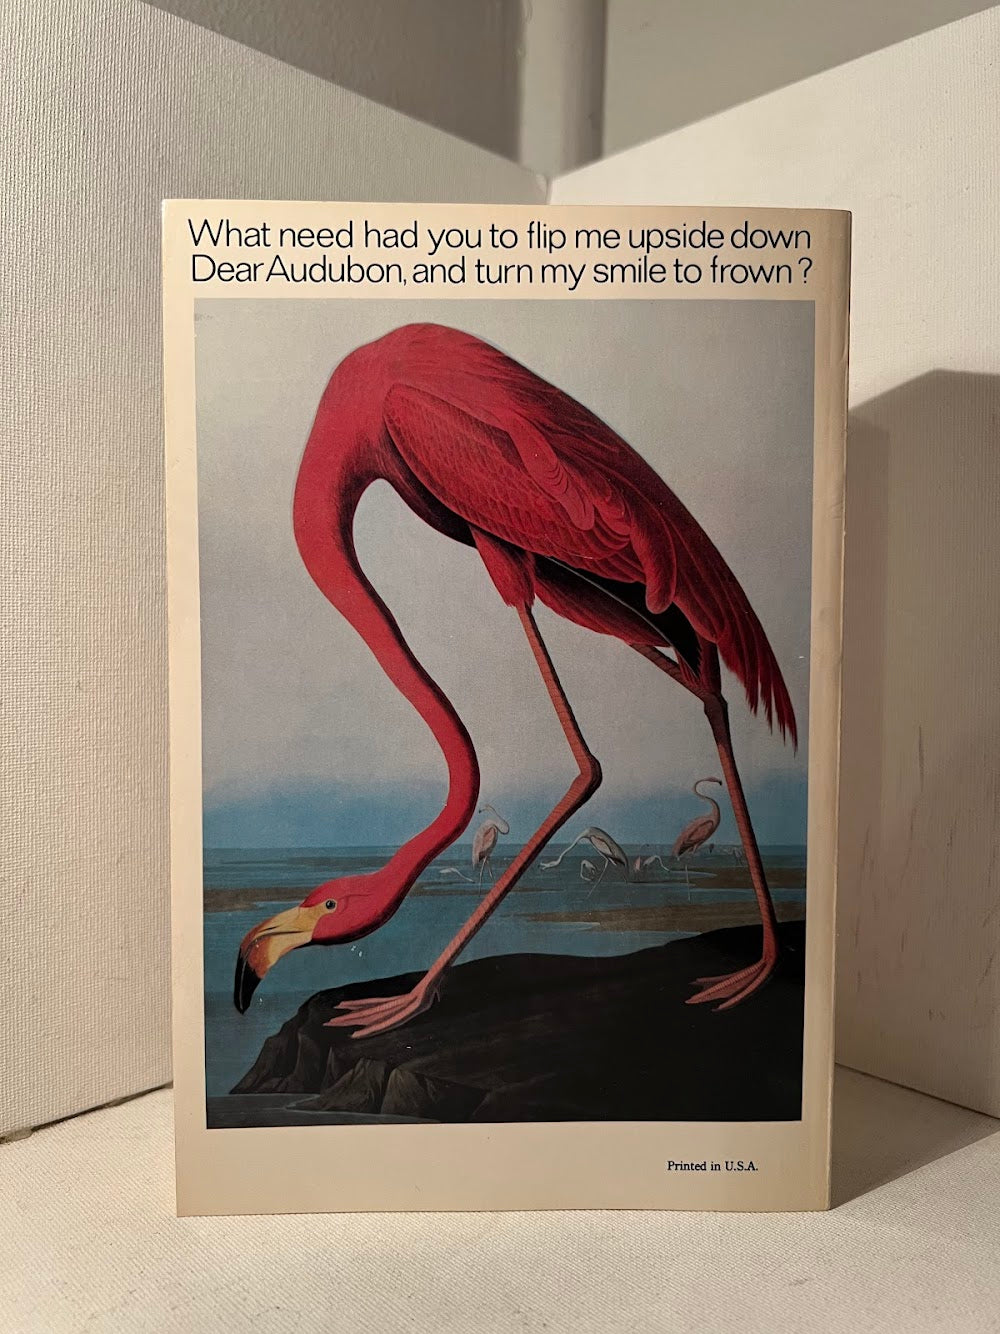 The Flamingo's Smile by Stephen Jay Gould